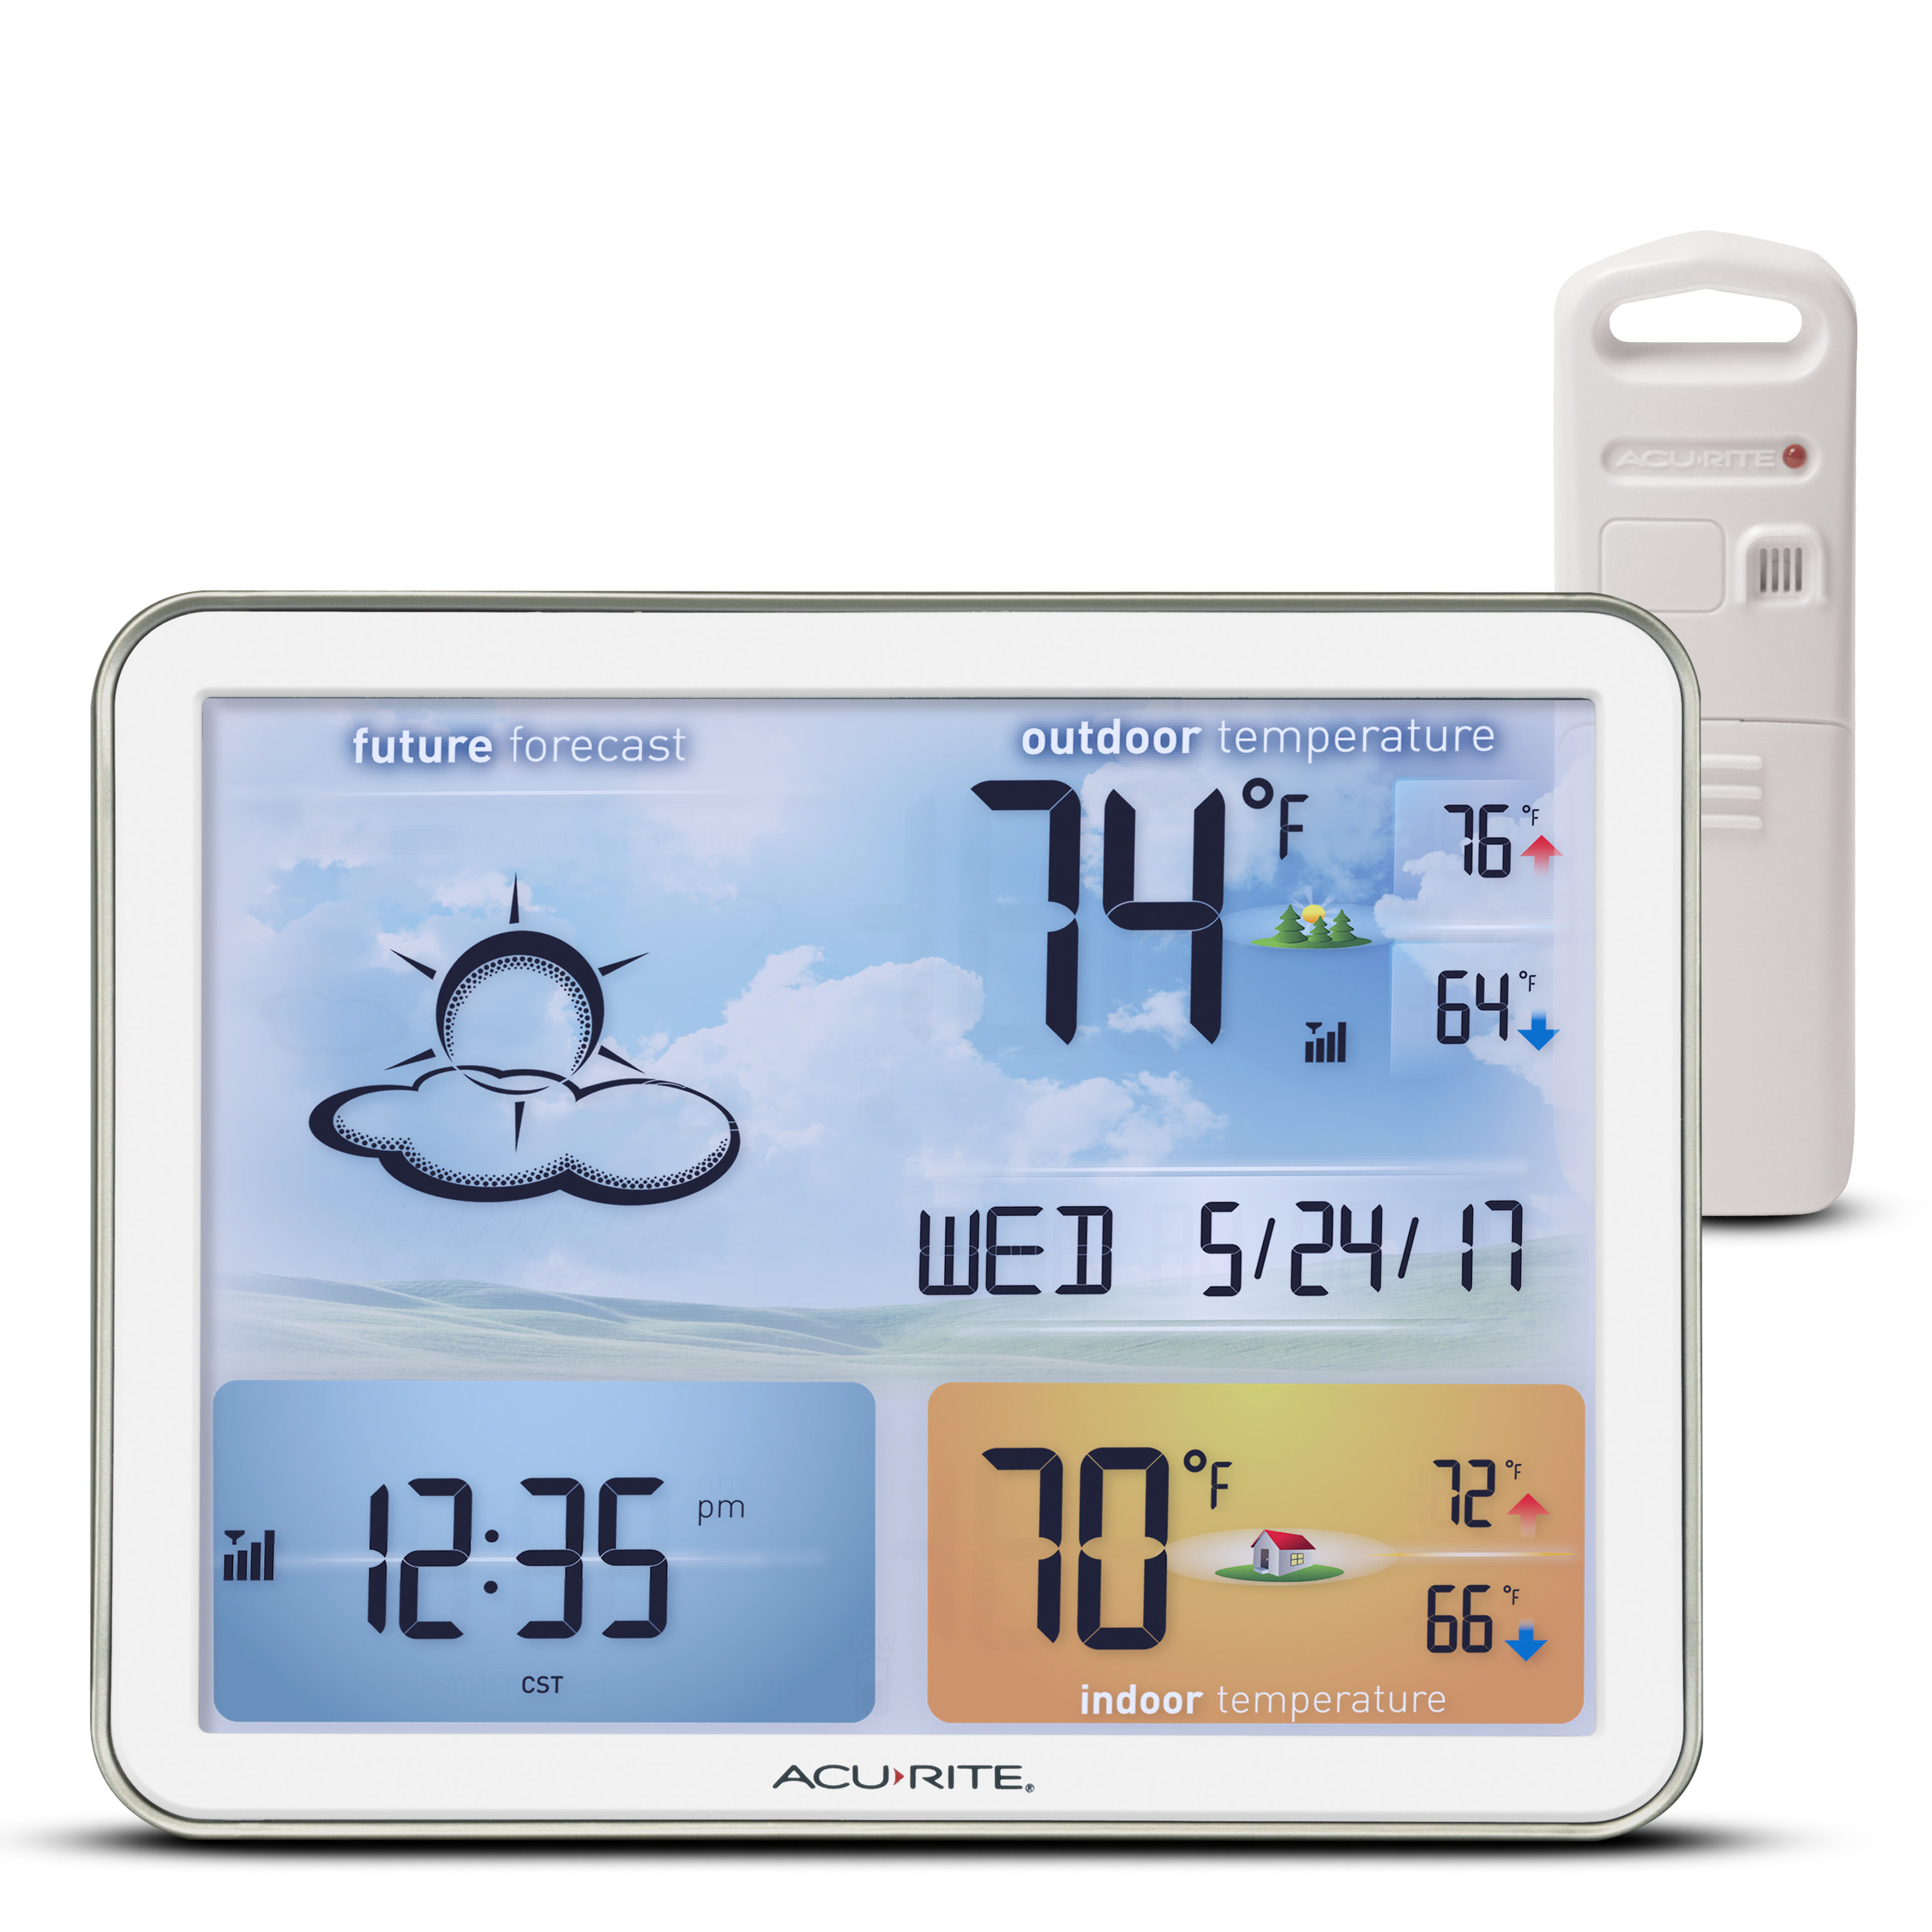 AcuRite Acurite weather forecaster with color display model #02081M 